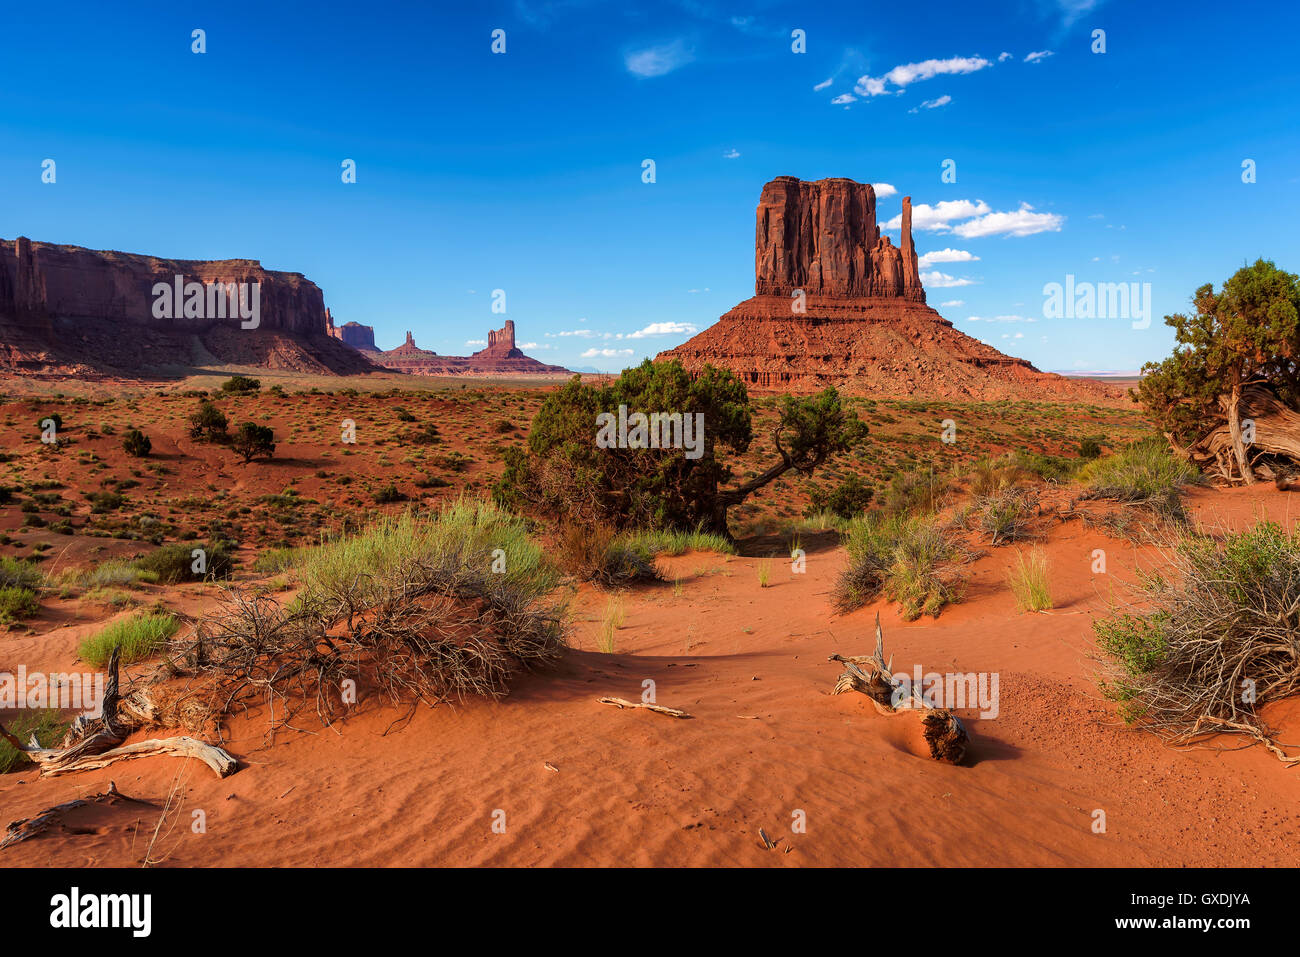 Red sand dunes in Monument Valley, Utah, USA Stock Photo - Alamy